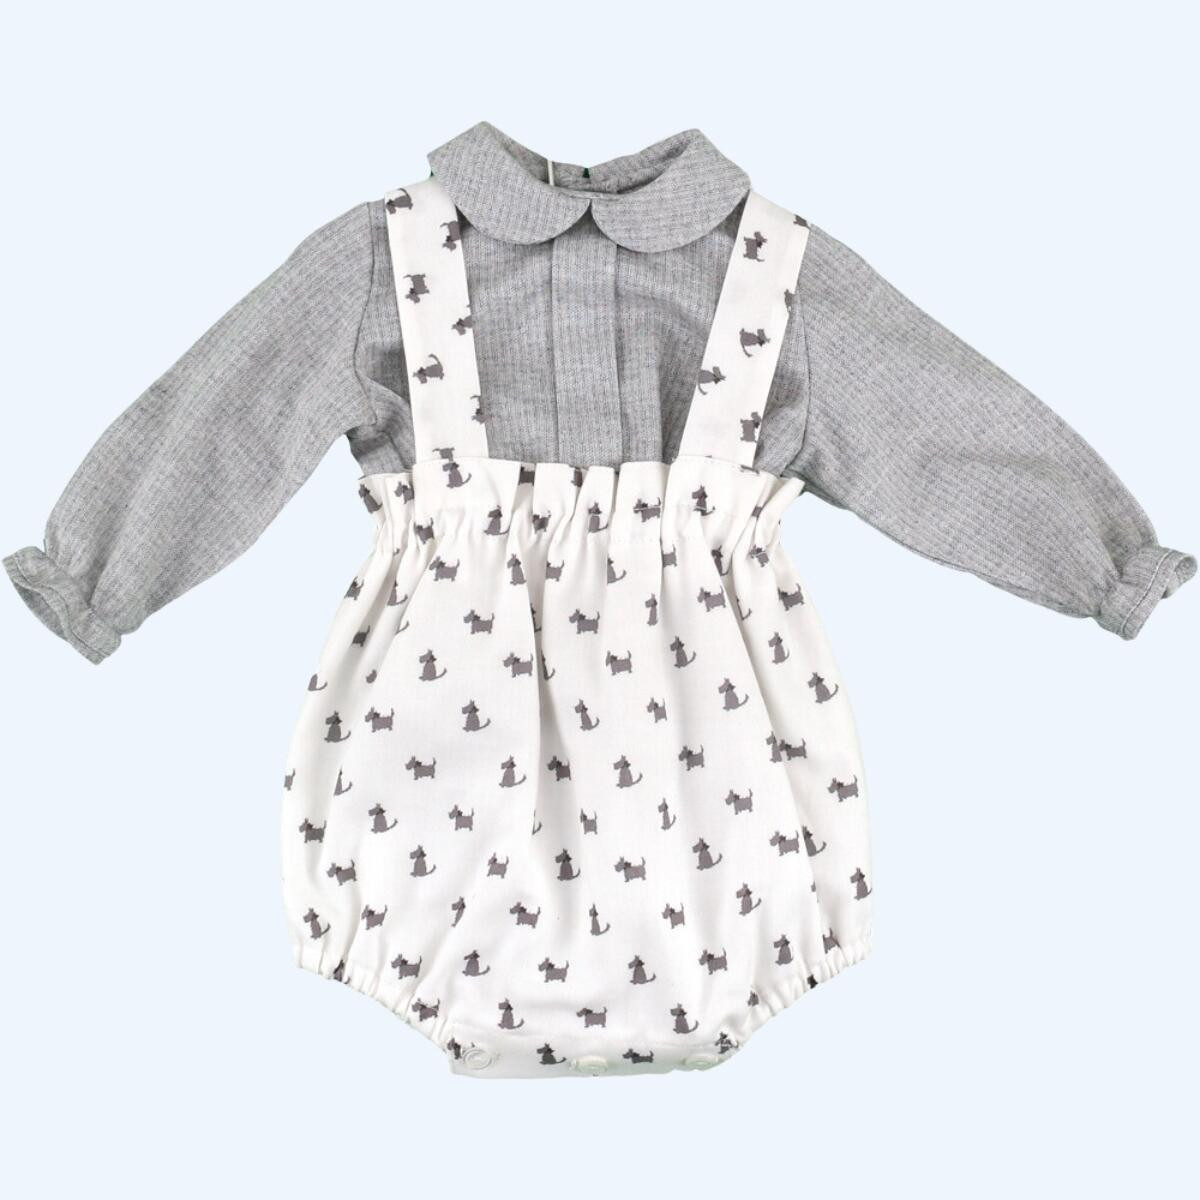 DOGS PRINTED ROMPER AND TOP BABYFERR - 1